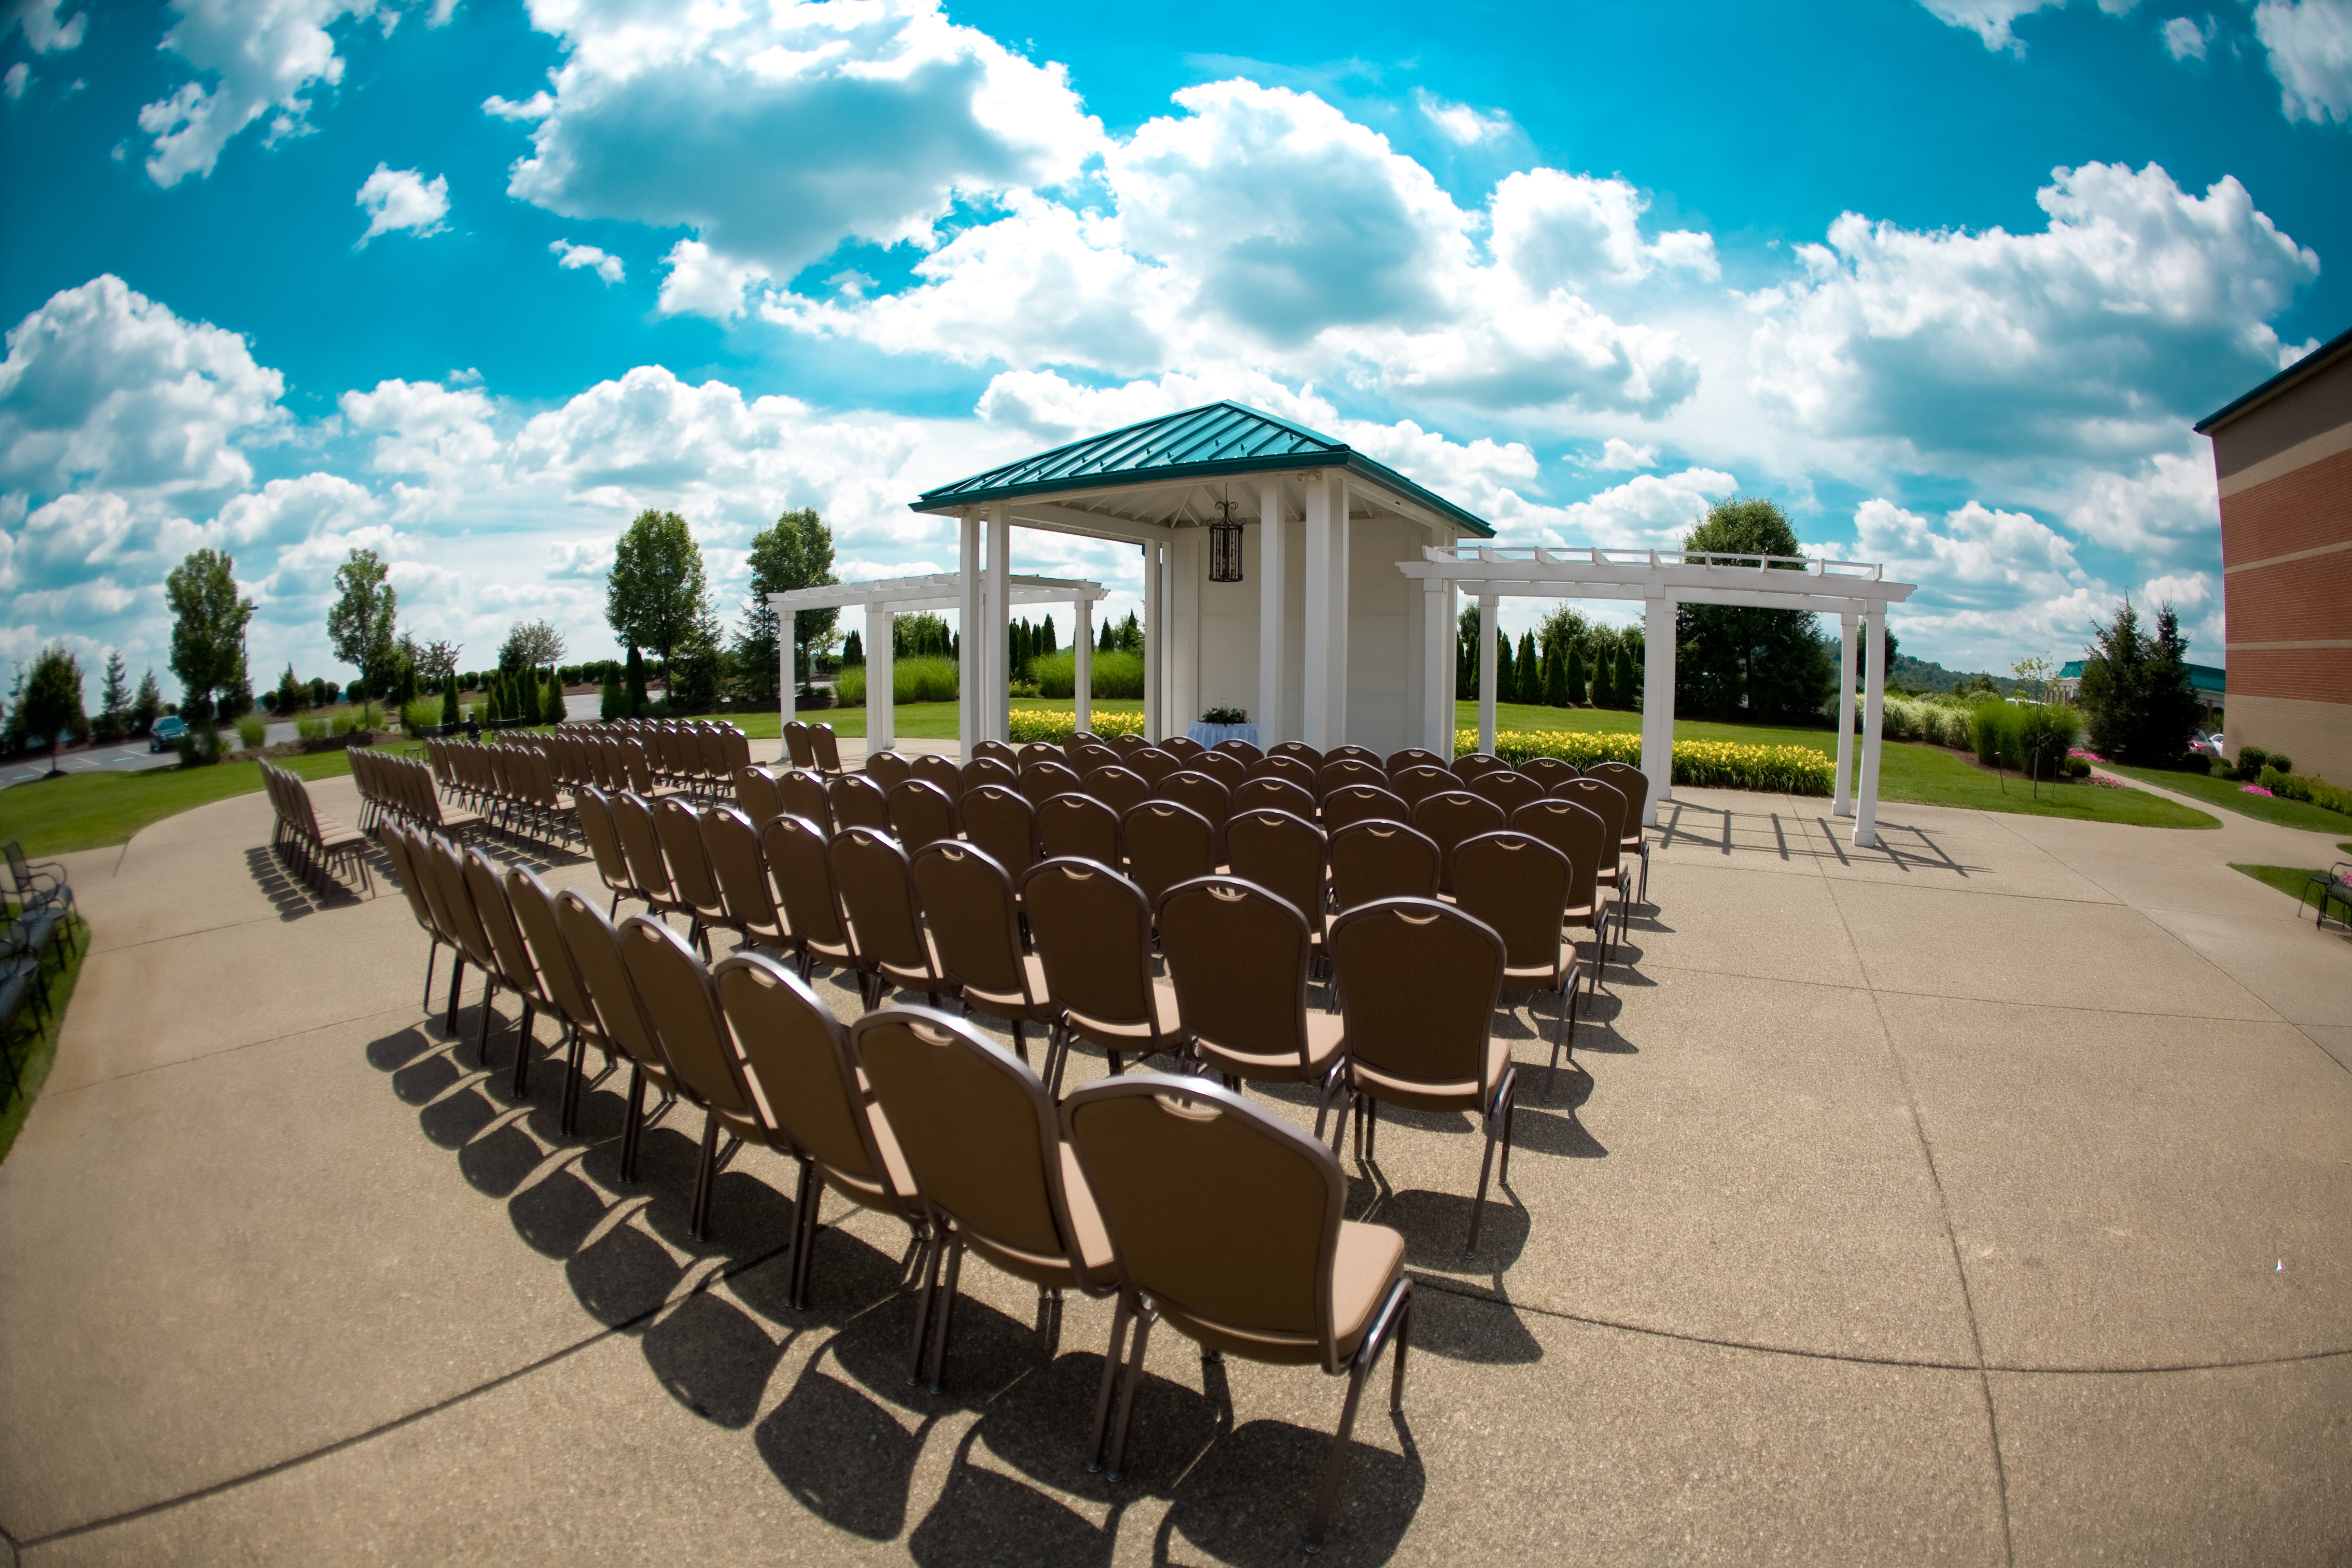 CHairs Arranged Theater Style in Courtyard for Outdoor Wedding